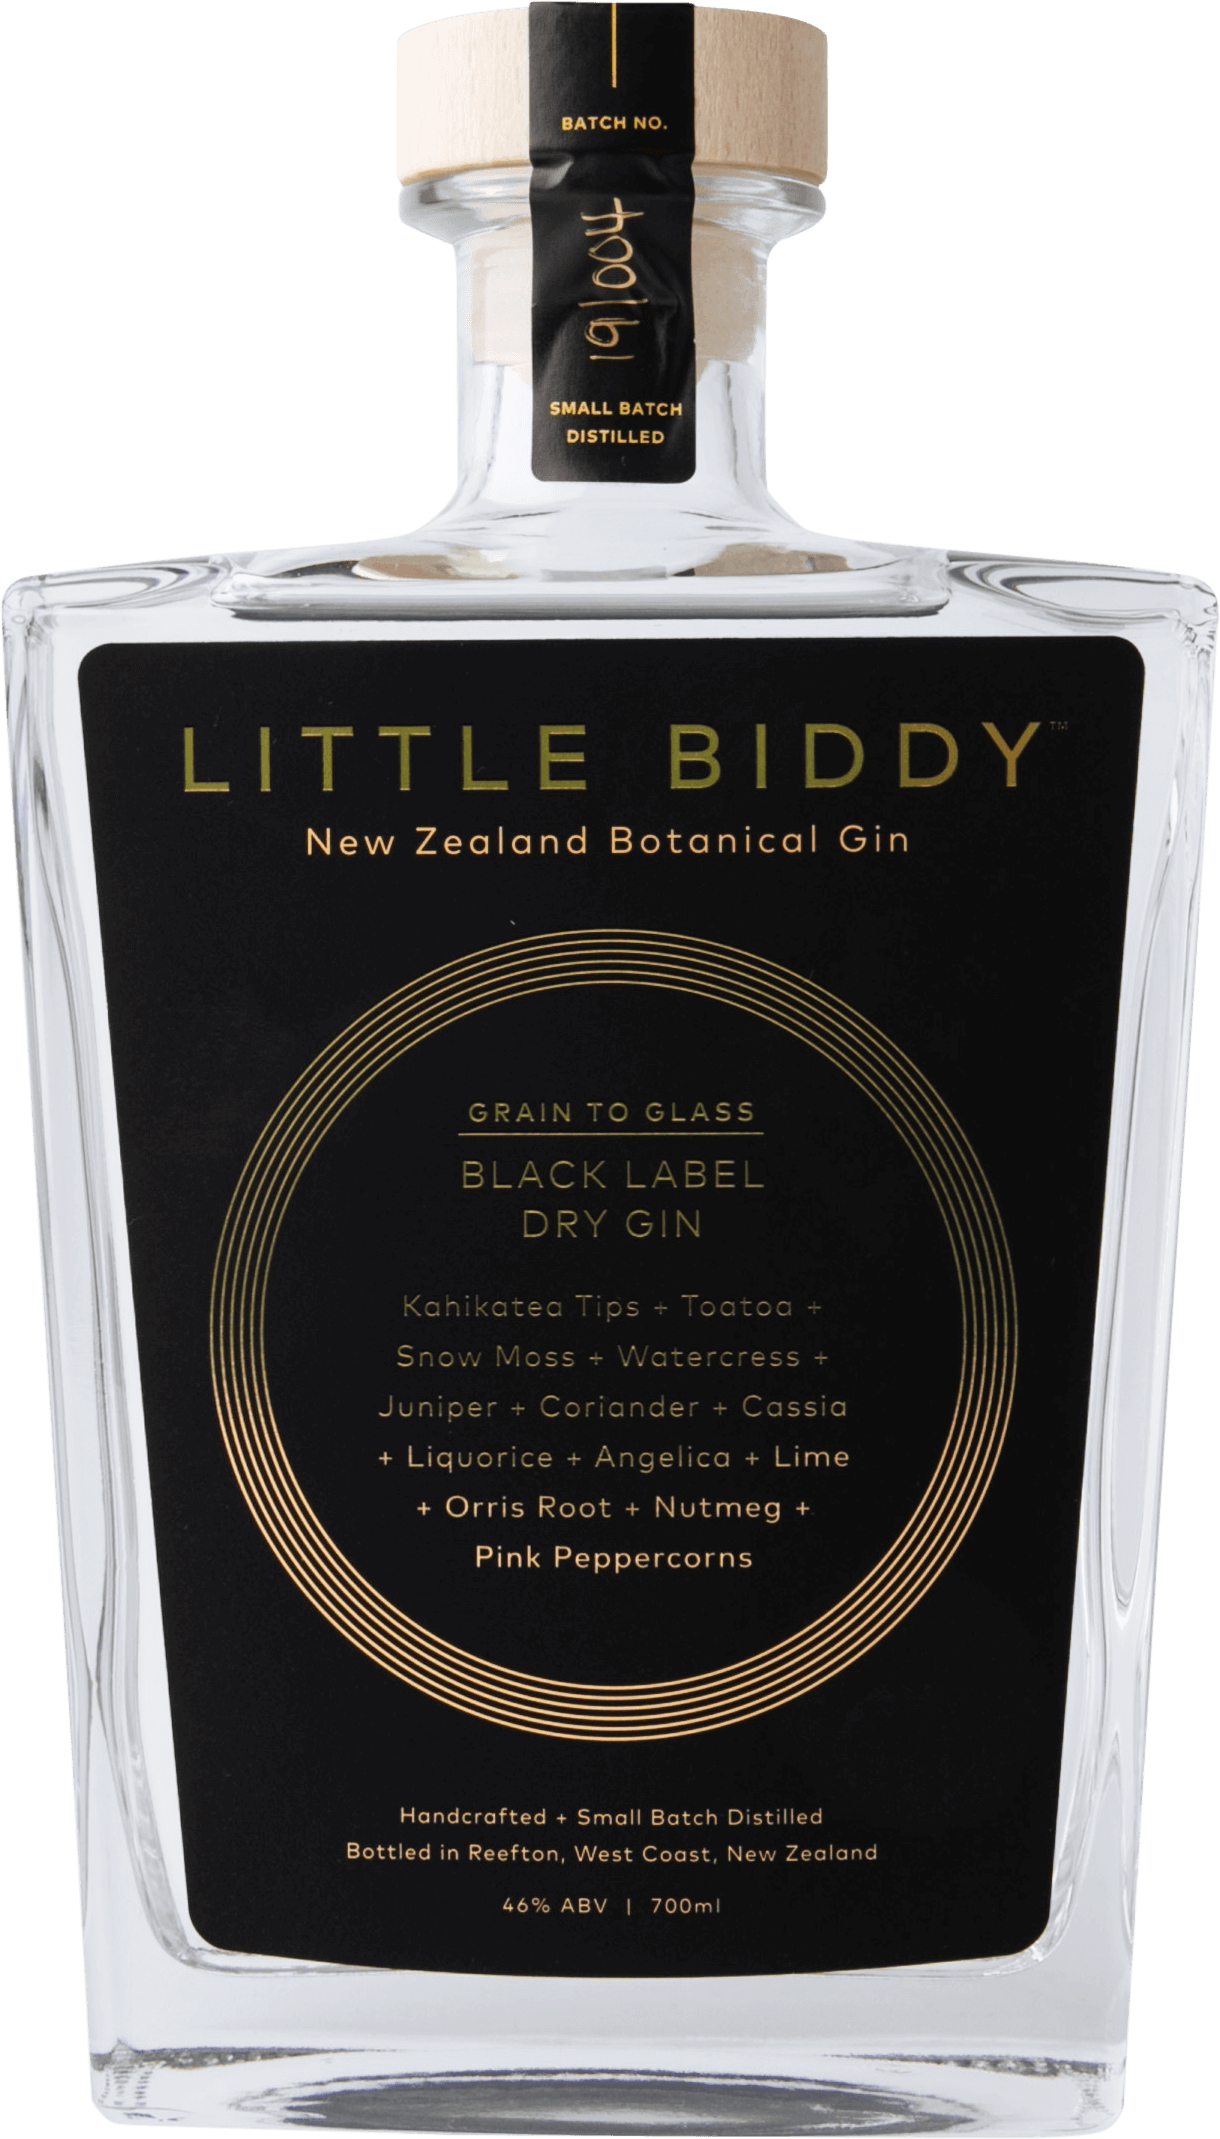 An image of a bottle of Little Biddy Black Label Dry Gin by Reefton Distilling